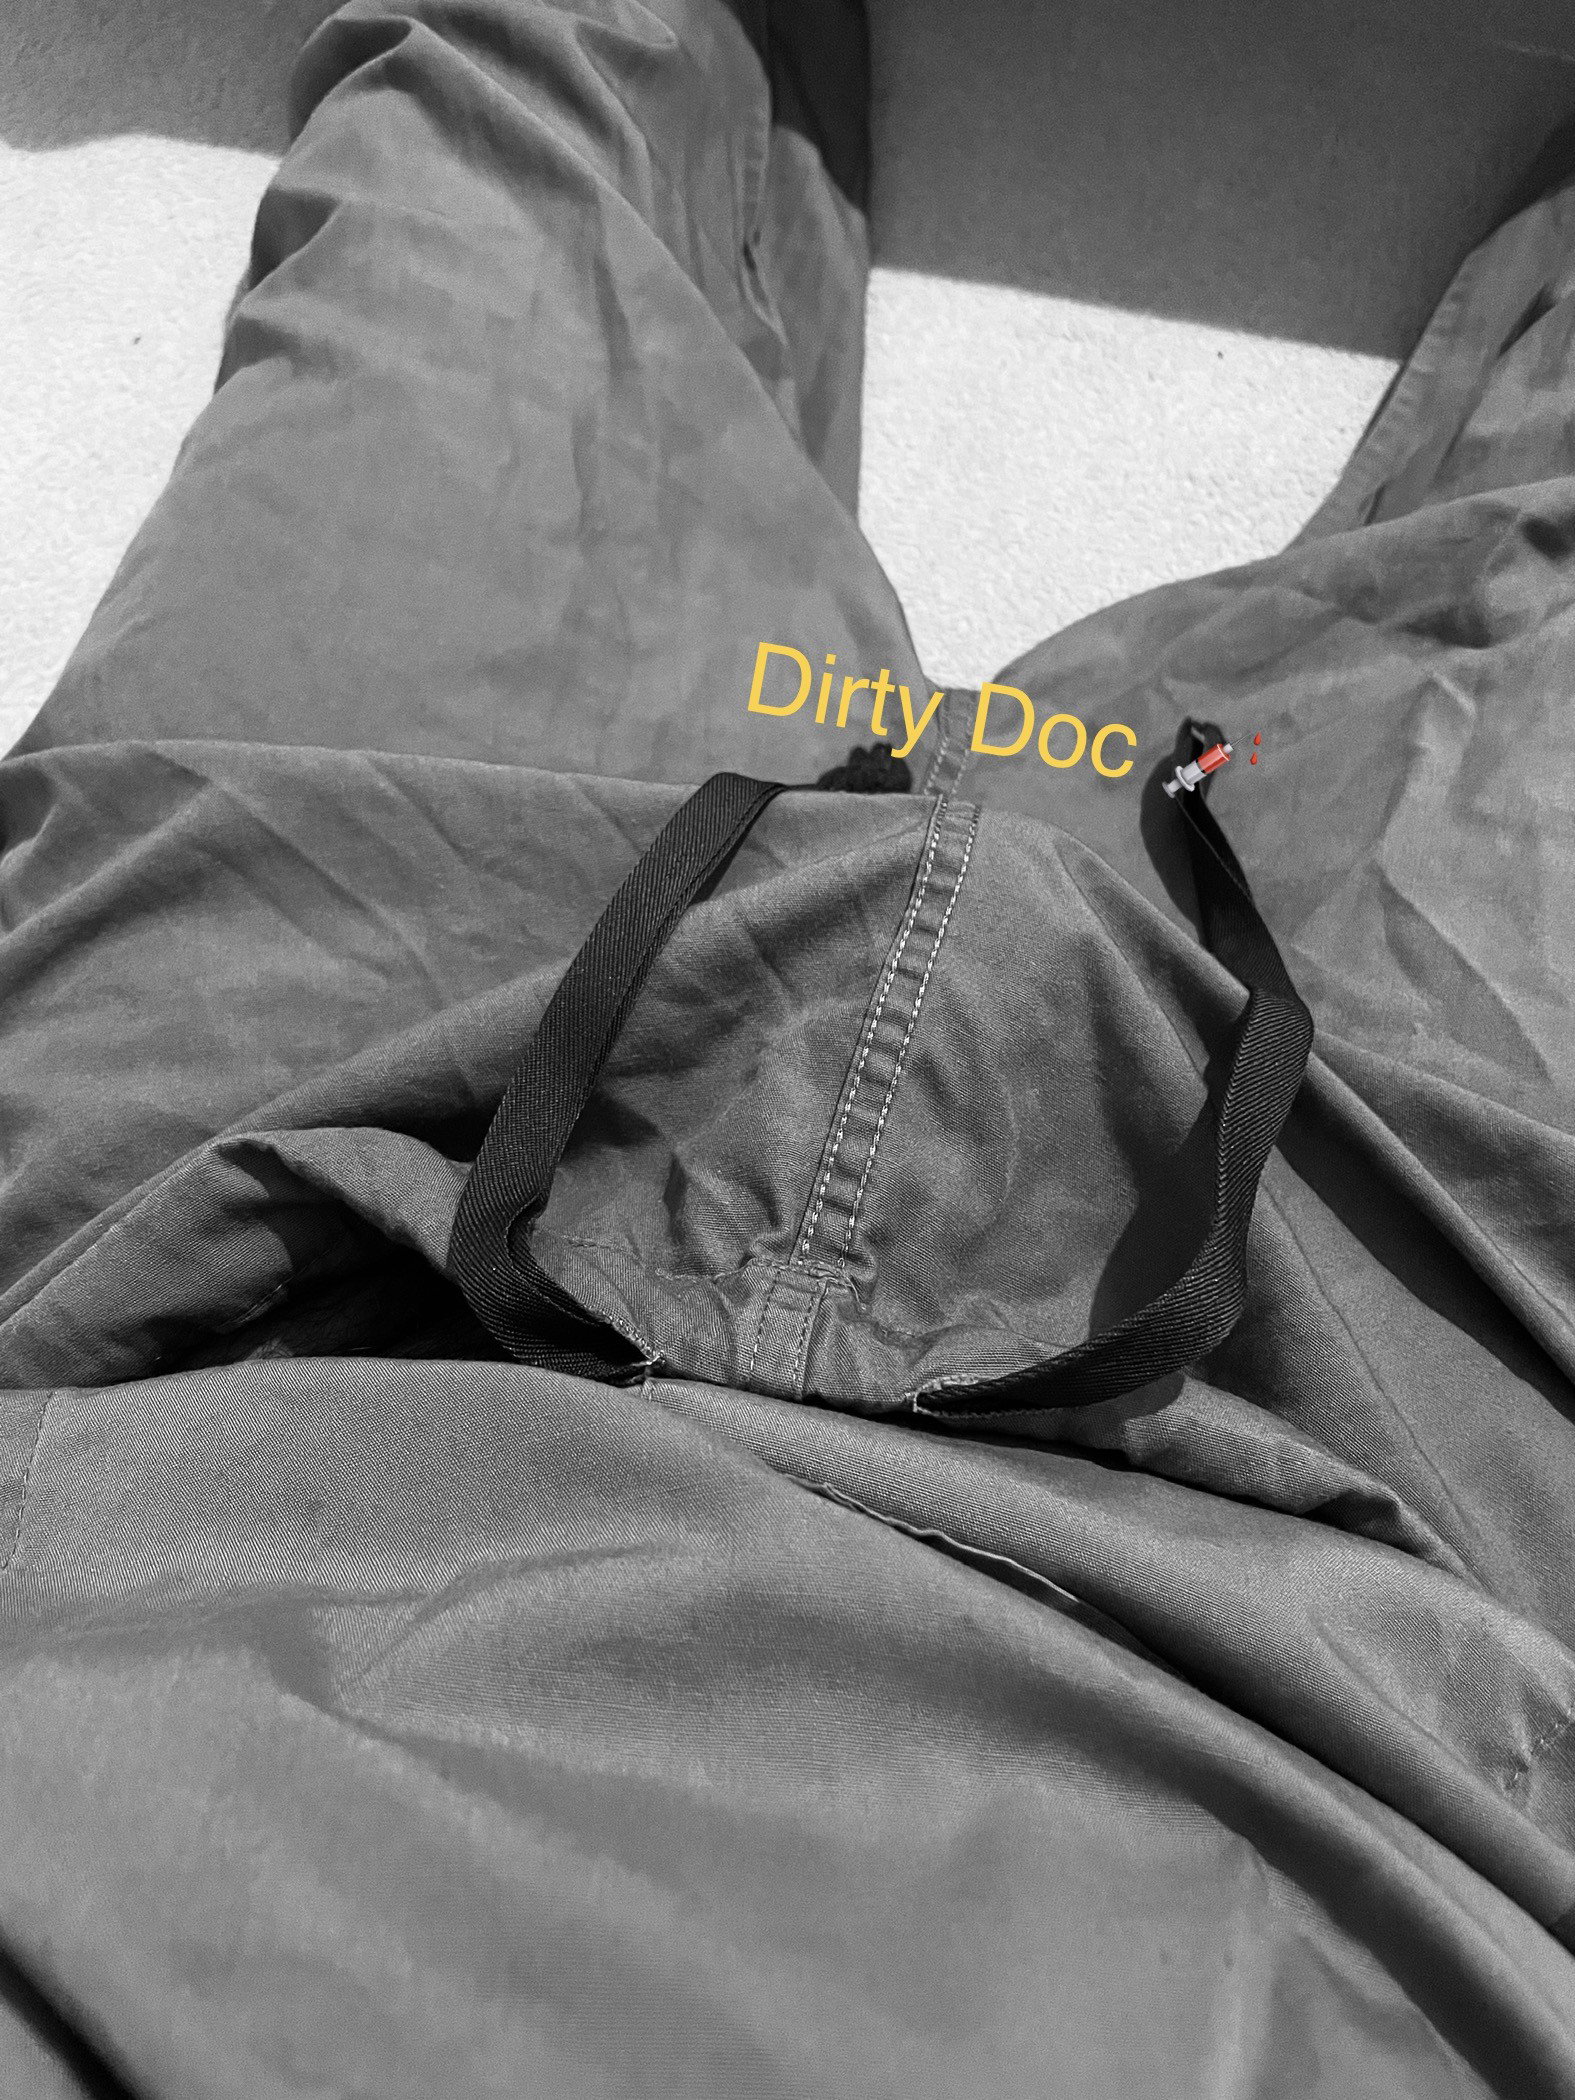 Photo by Dirty Doc with the username @Dirtyydoc,  January 3, 2021 at 9:56 PM. The post is about the topic Sexy Nurses and the text says '"Me" tired..."Him" ready after a hectic shift Just wants out..🩺💉🦠 more to come after more likes and shares...
#scrubs #nurses #nurse #peek-a-boo #uniform #mature #bbc #service #uncut #cock #men #workflash #wild #dick #bull #desire #adult #hot'